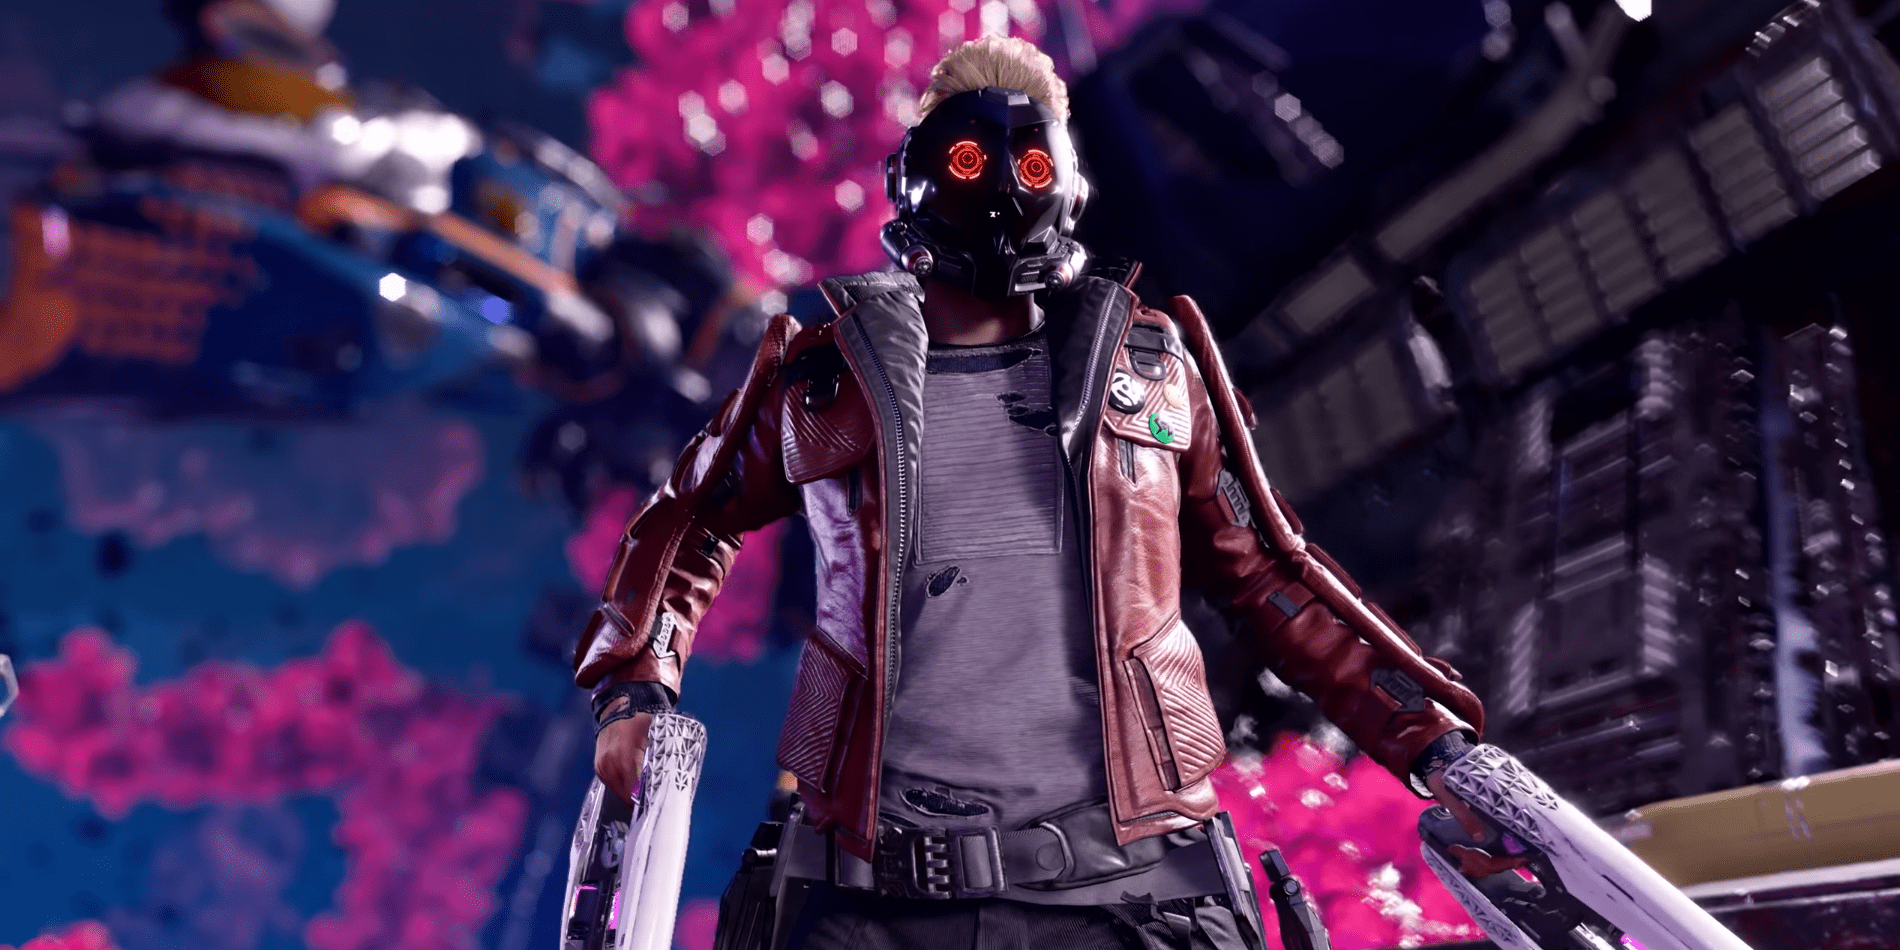 Marvel #39 s Guardians of the Galaxy: How Star Lord Gets His Name